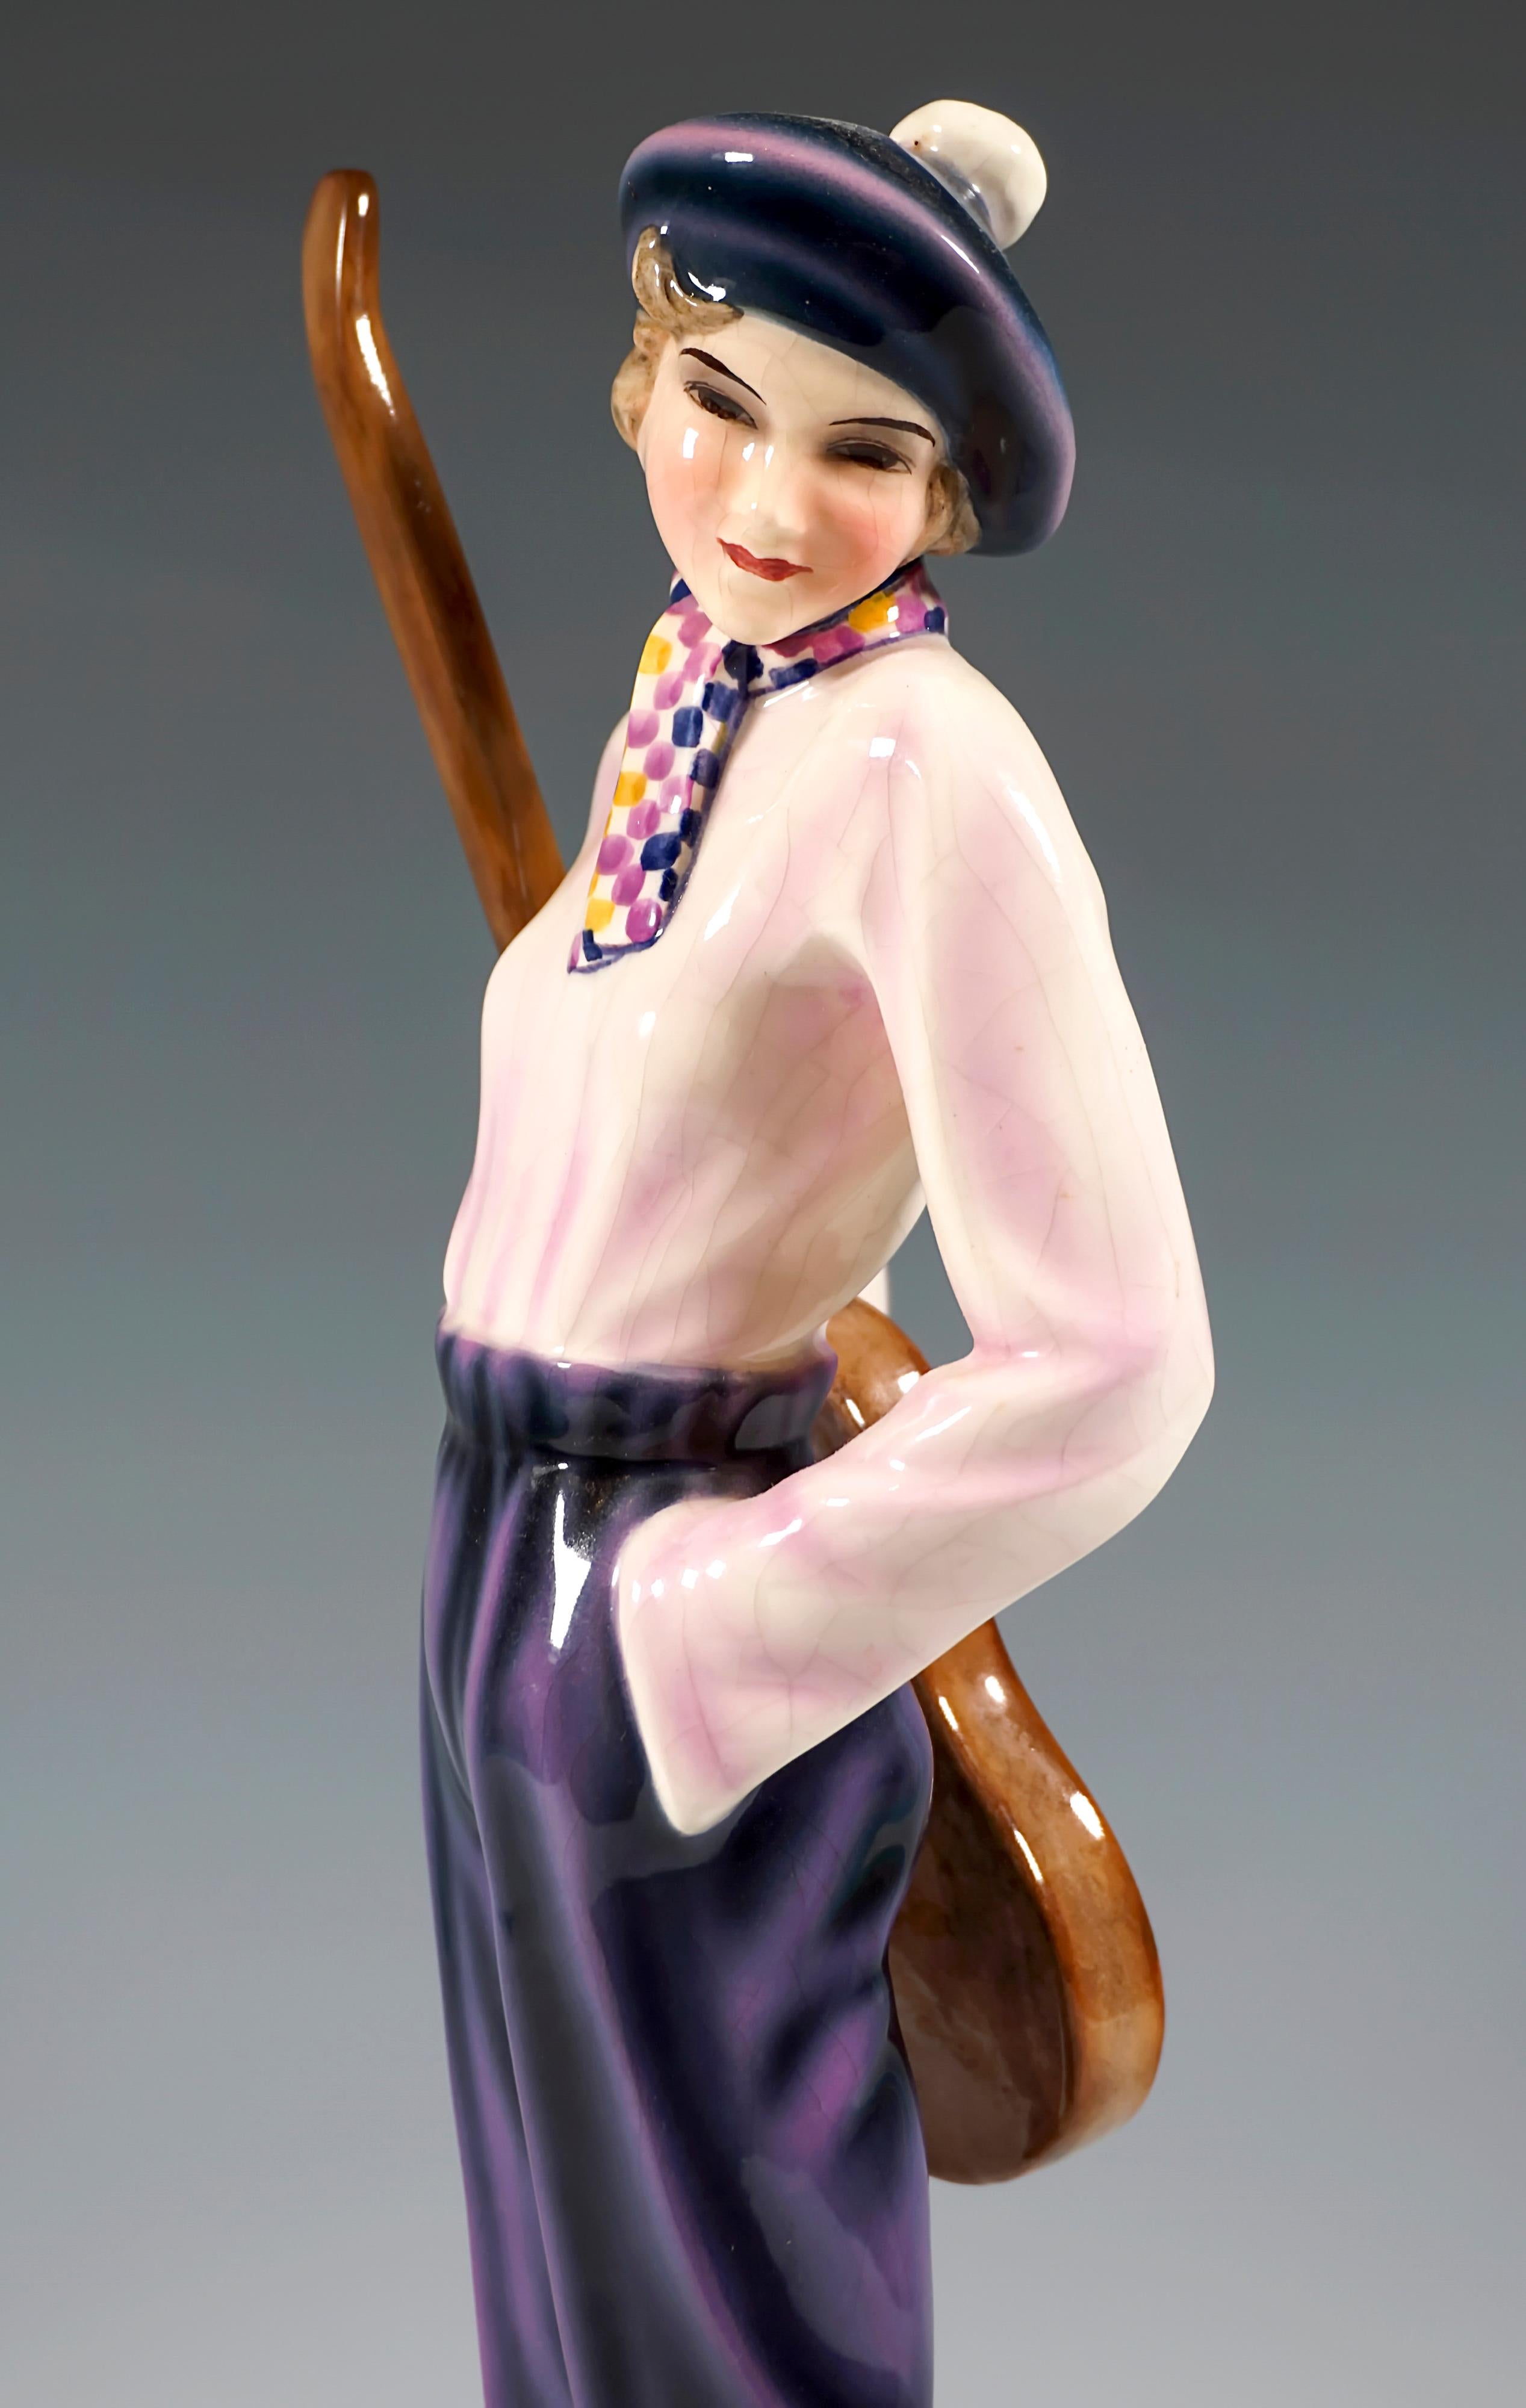 Mid-20th Century Goldscheider Art Déco Figure 'Daisy' Young Lady With Guitar, Stephan Dakon 1930 For Sale